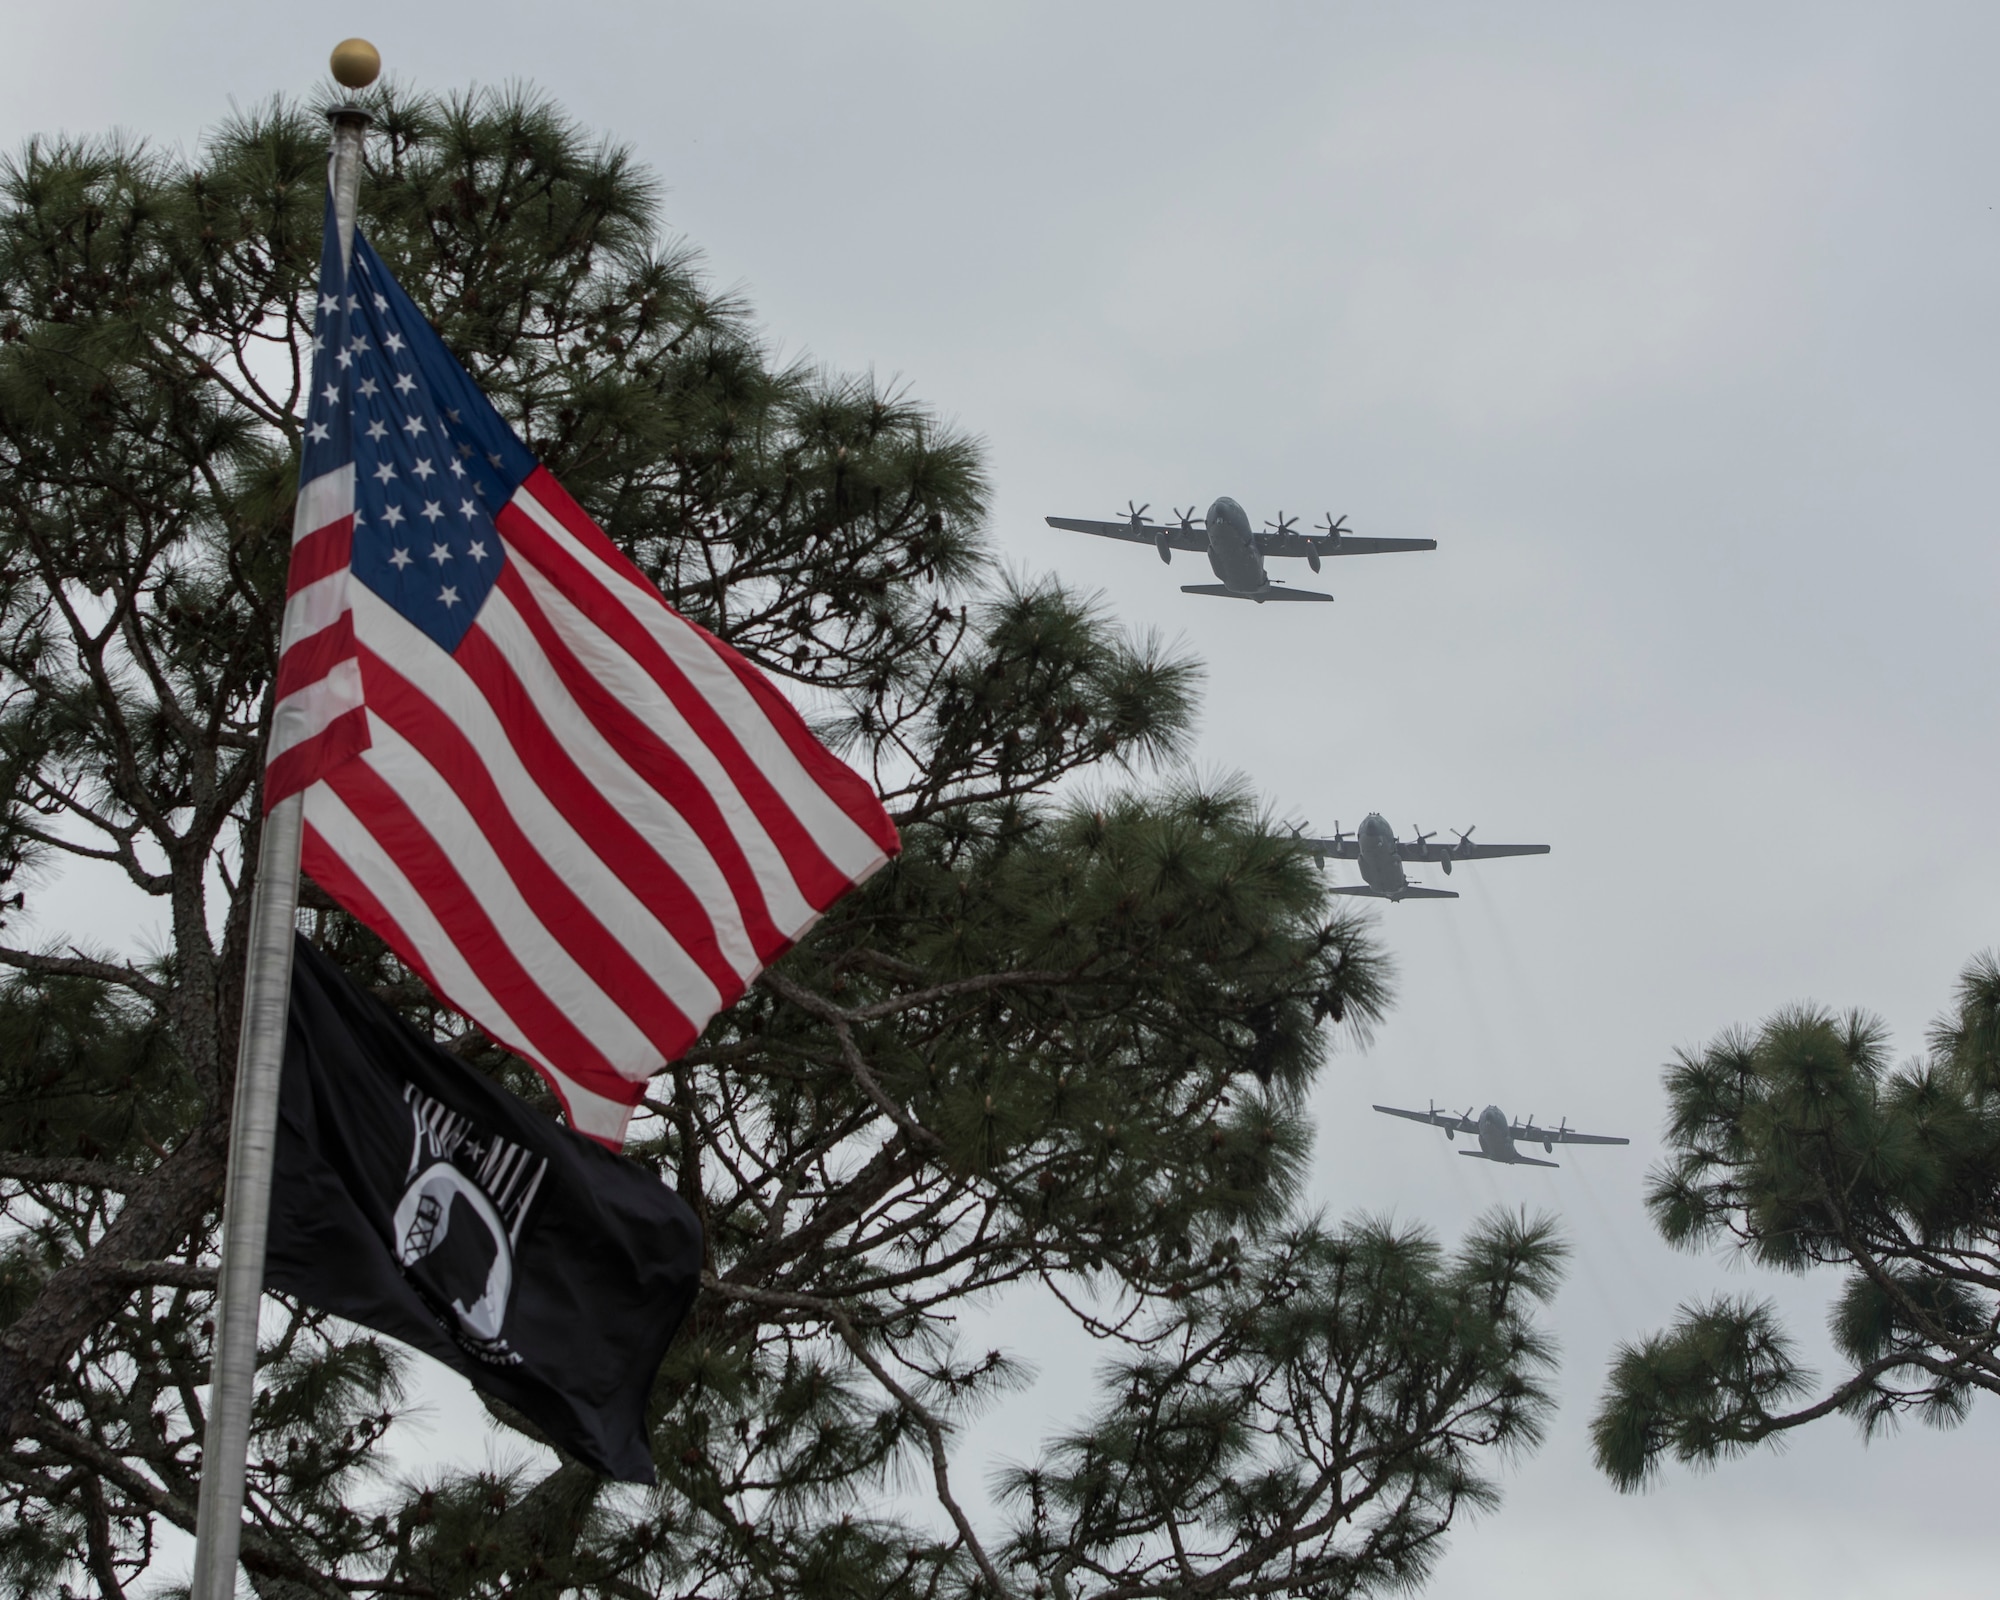 US and POW flags with three gunships flying in the background